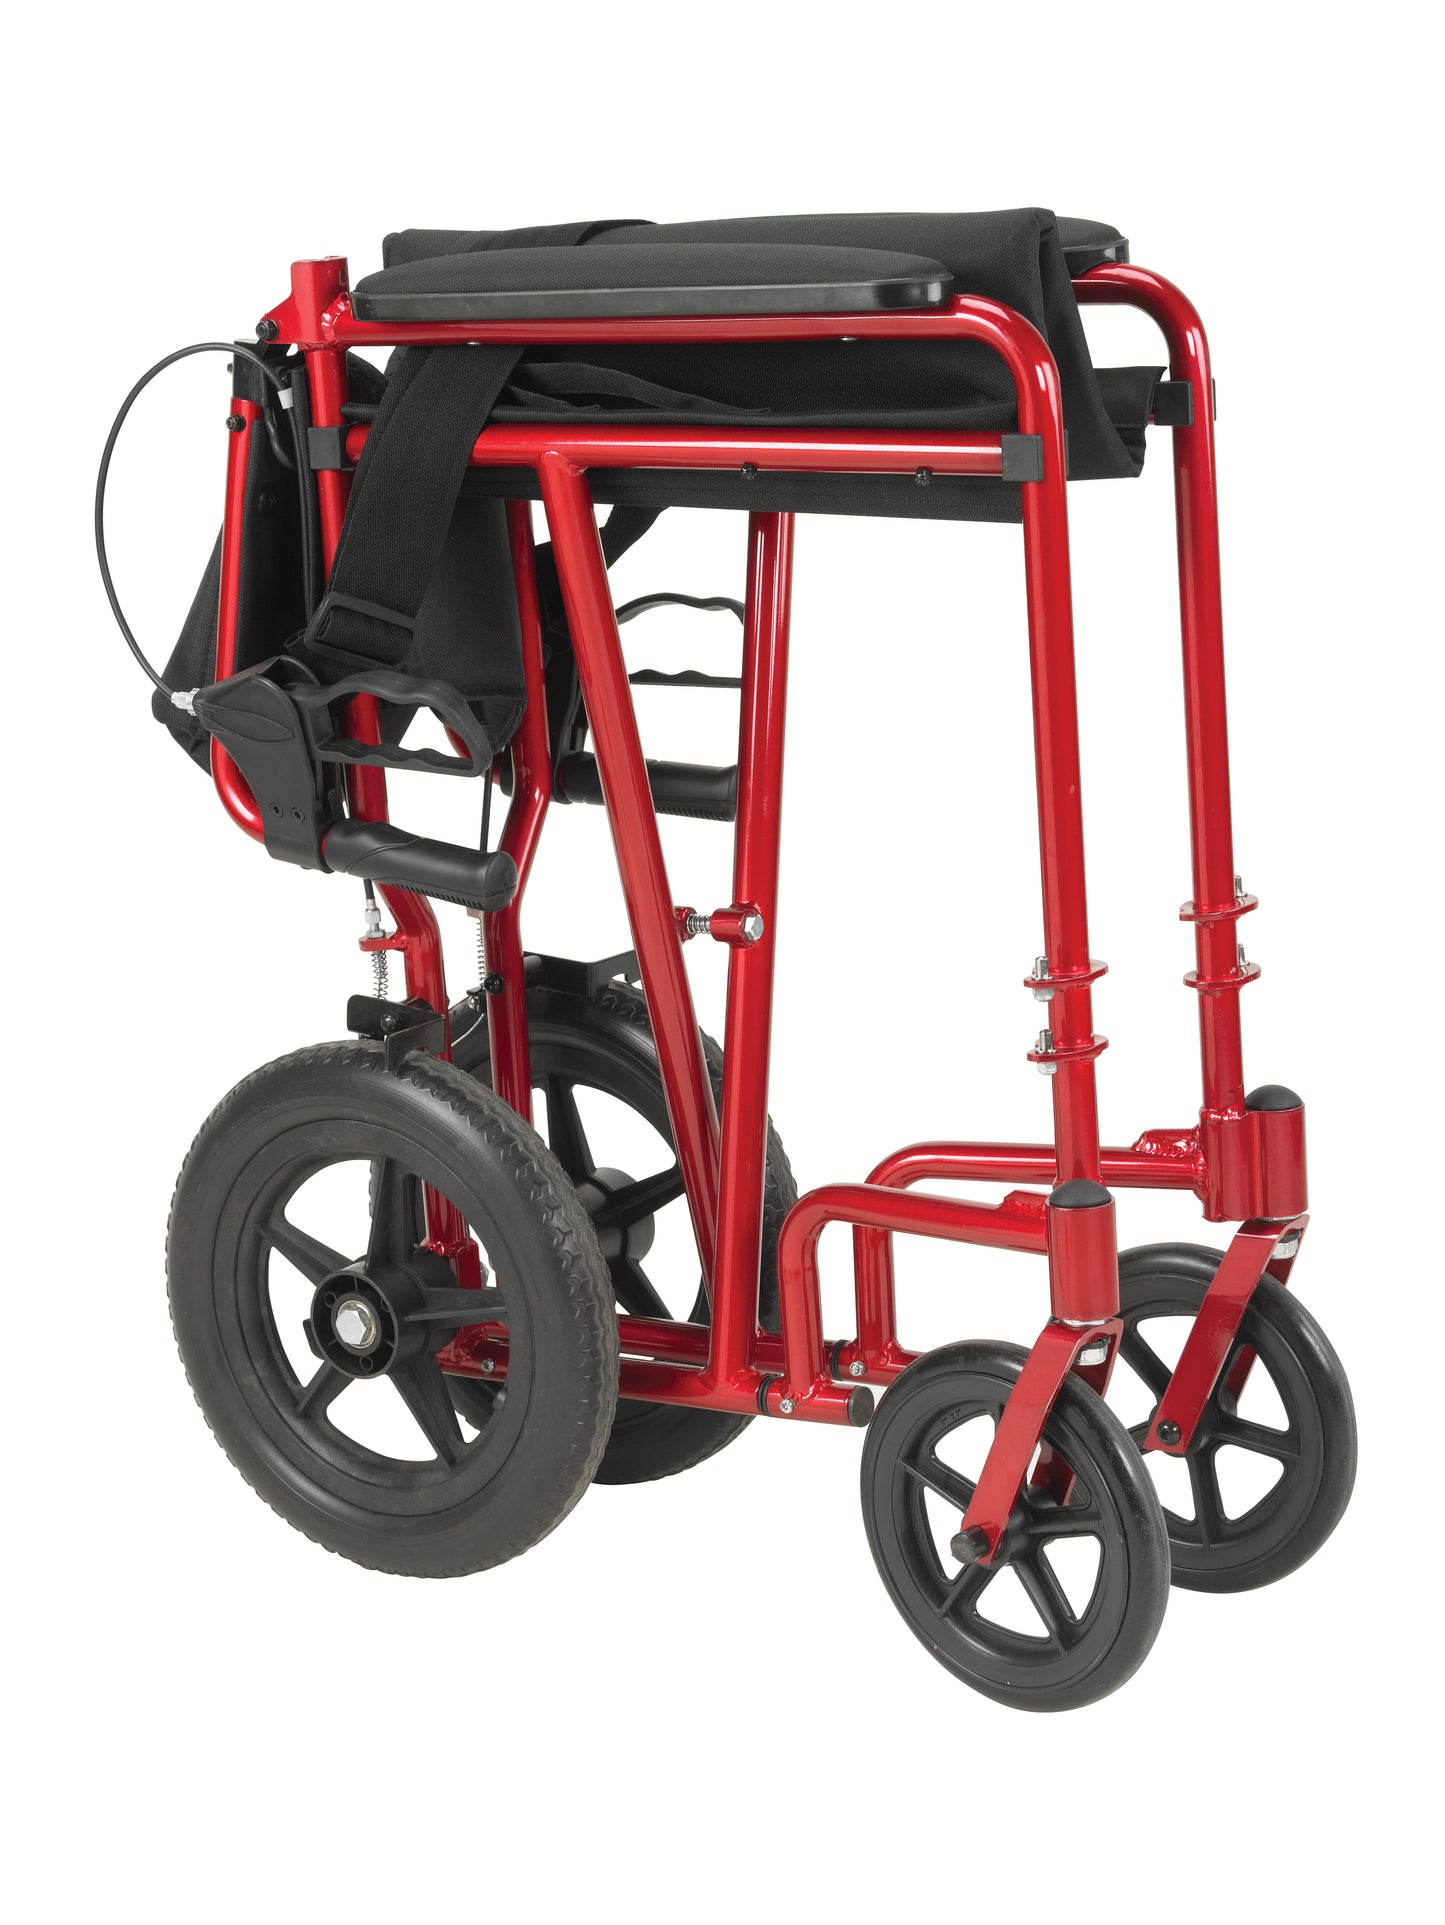 Lightweight Expedition Transport Wheelchair with Hand Brakes